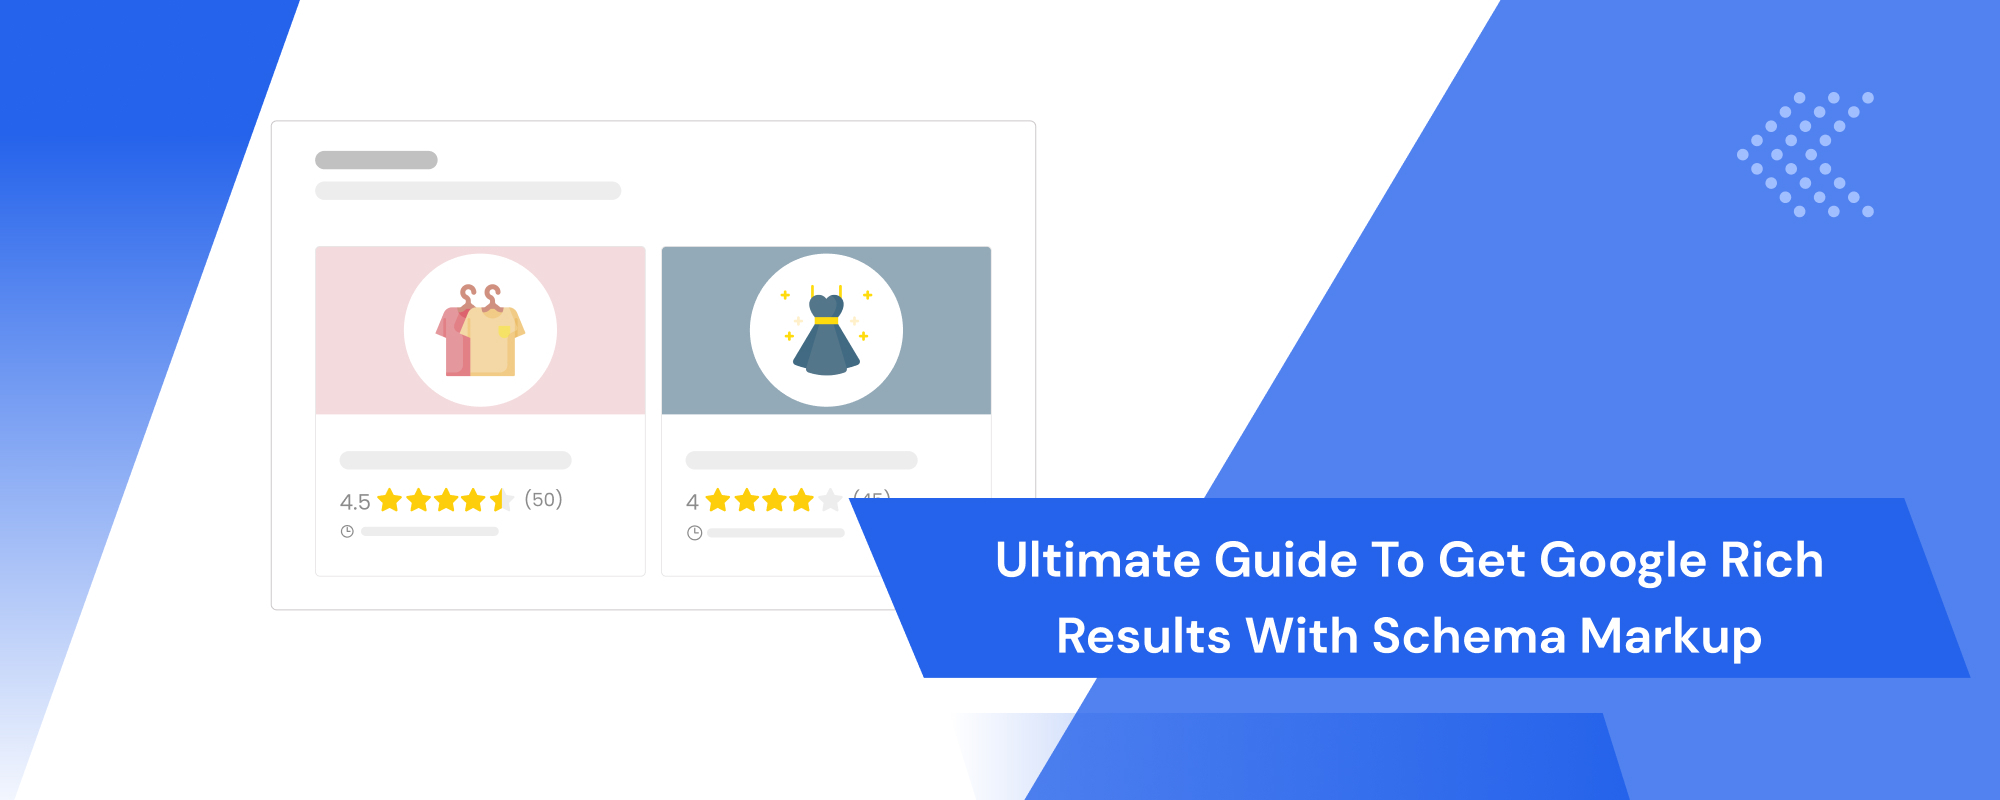 Ultimate Guide to Get Google Rich Results with Schema Markup